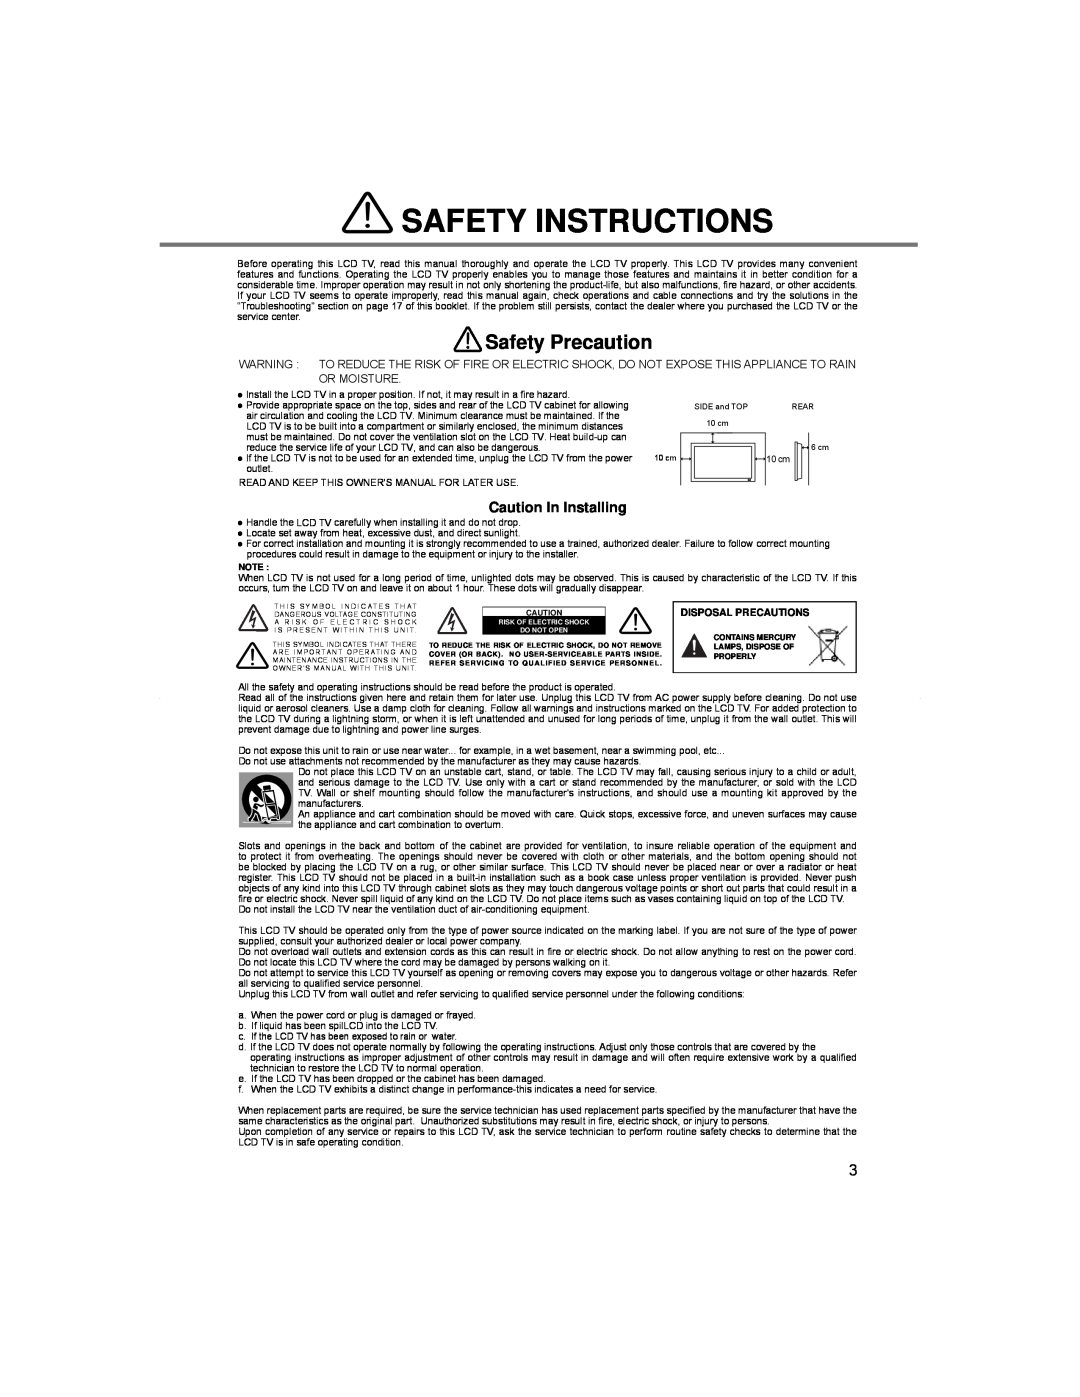 Sanyo LCE-24C100F(R), LCE-24C100F(S) Safety Instructions, Safety Precaution, Caution In Installing, Disposal Precautions 